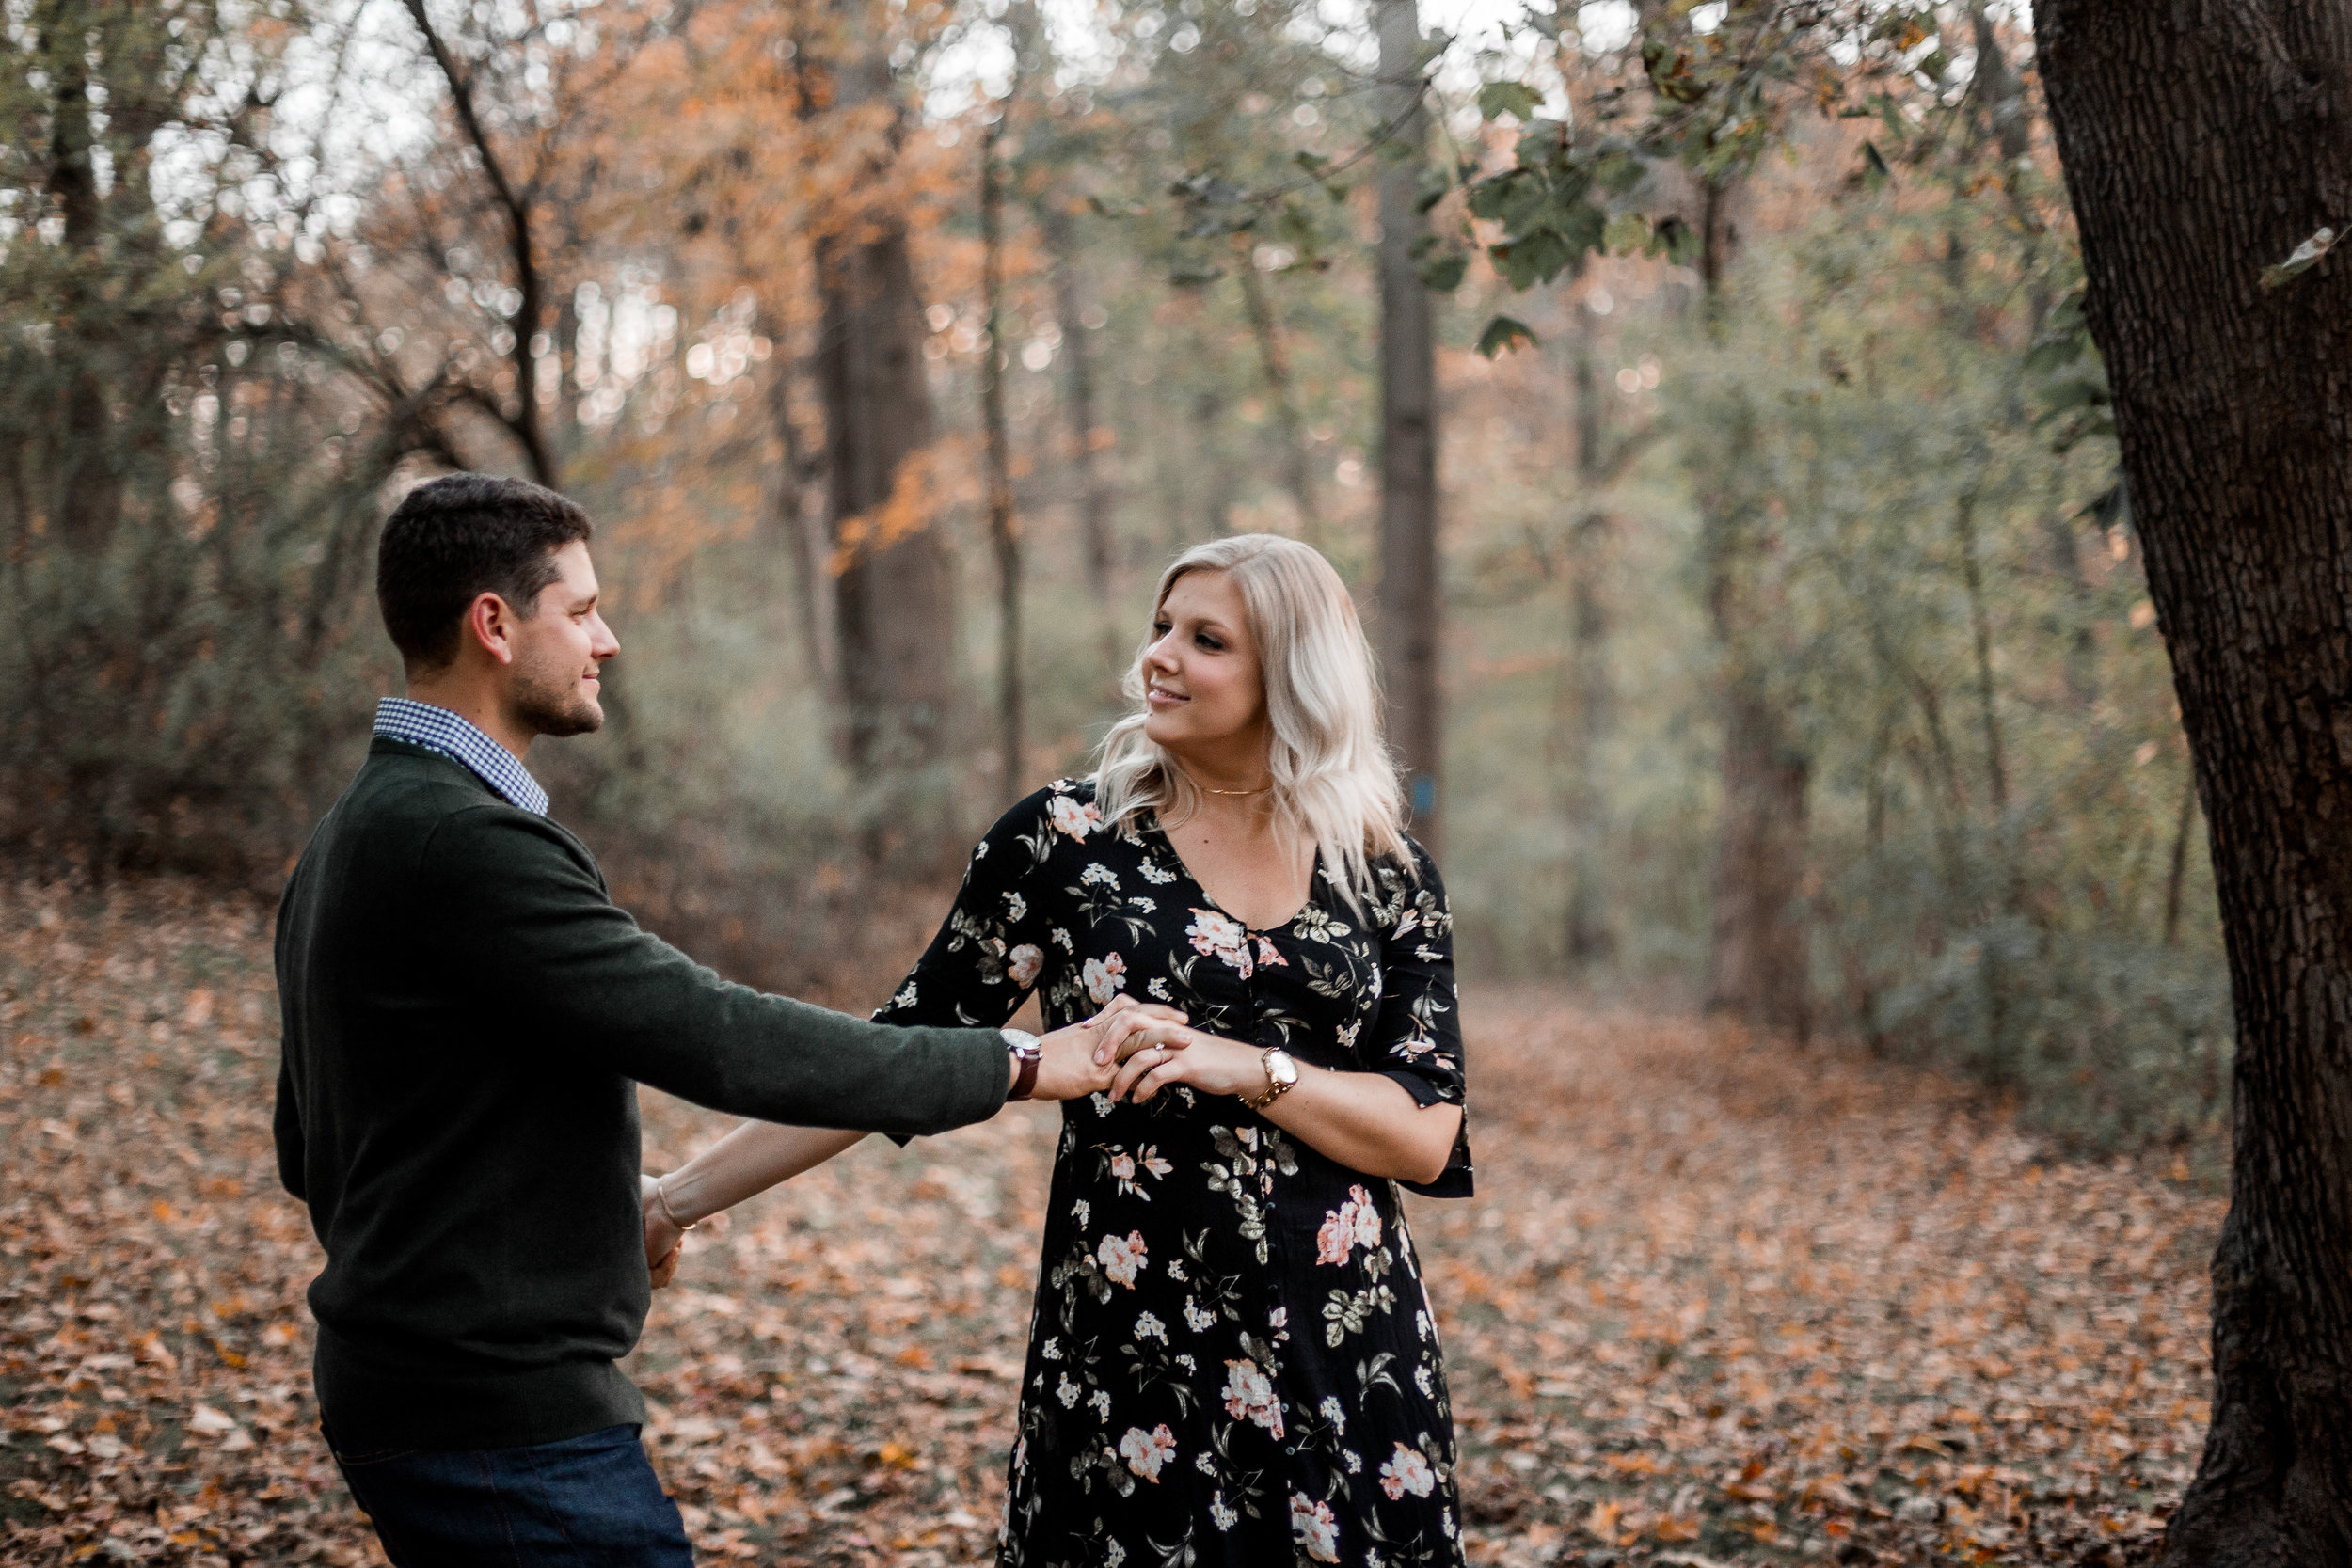 nicole-daacke-photography-carefree-bohemian-lancaster-pa-pennsylvania-engagement-photos-engagement-session-golden-sunset-adventure-session-in-lancaster-pa-lancaster-pa-outdoor-wedding-photographer-51.jpg